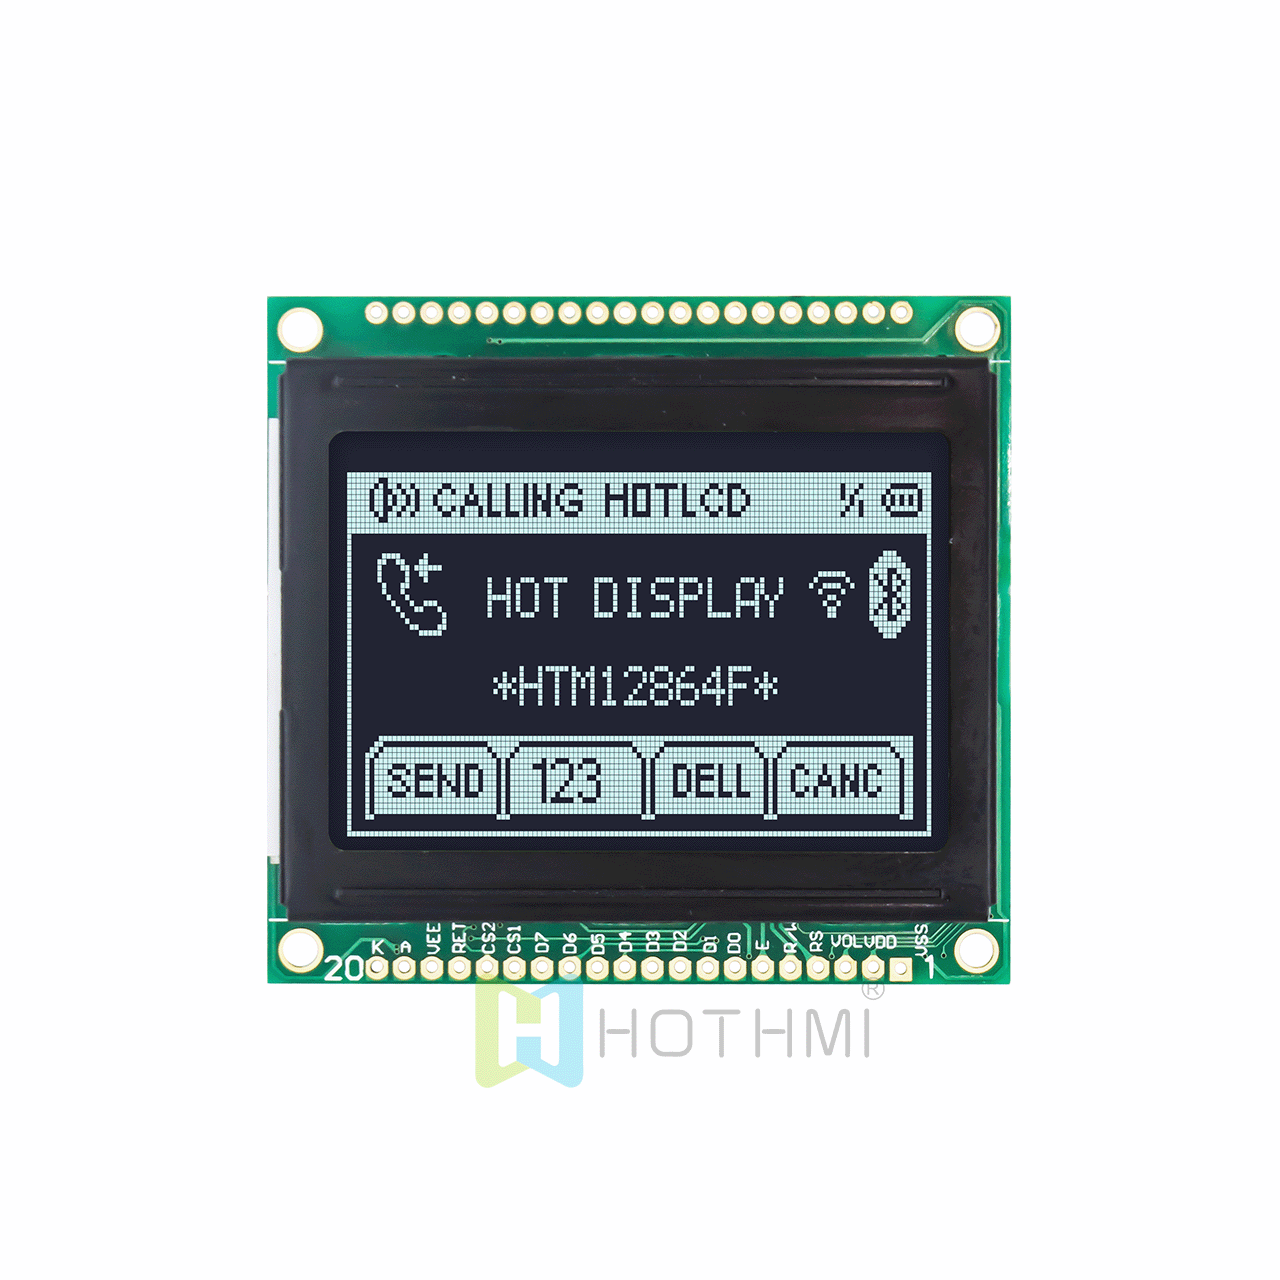 2.0-inch graphic dot matrix module/128x64 resolution/white text on black background/KS108 or AIP31108 control chip/SPI